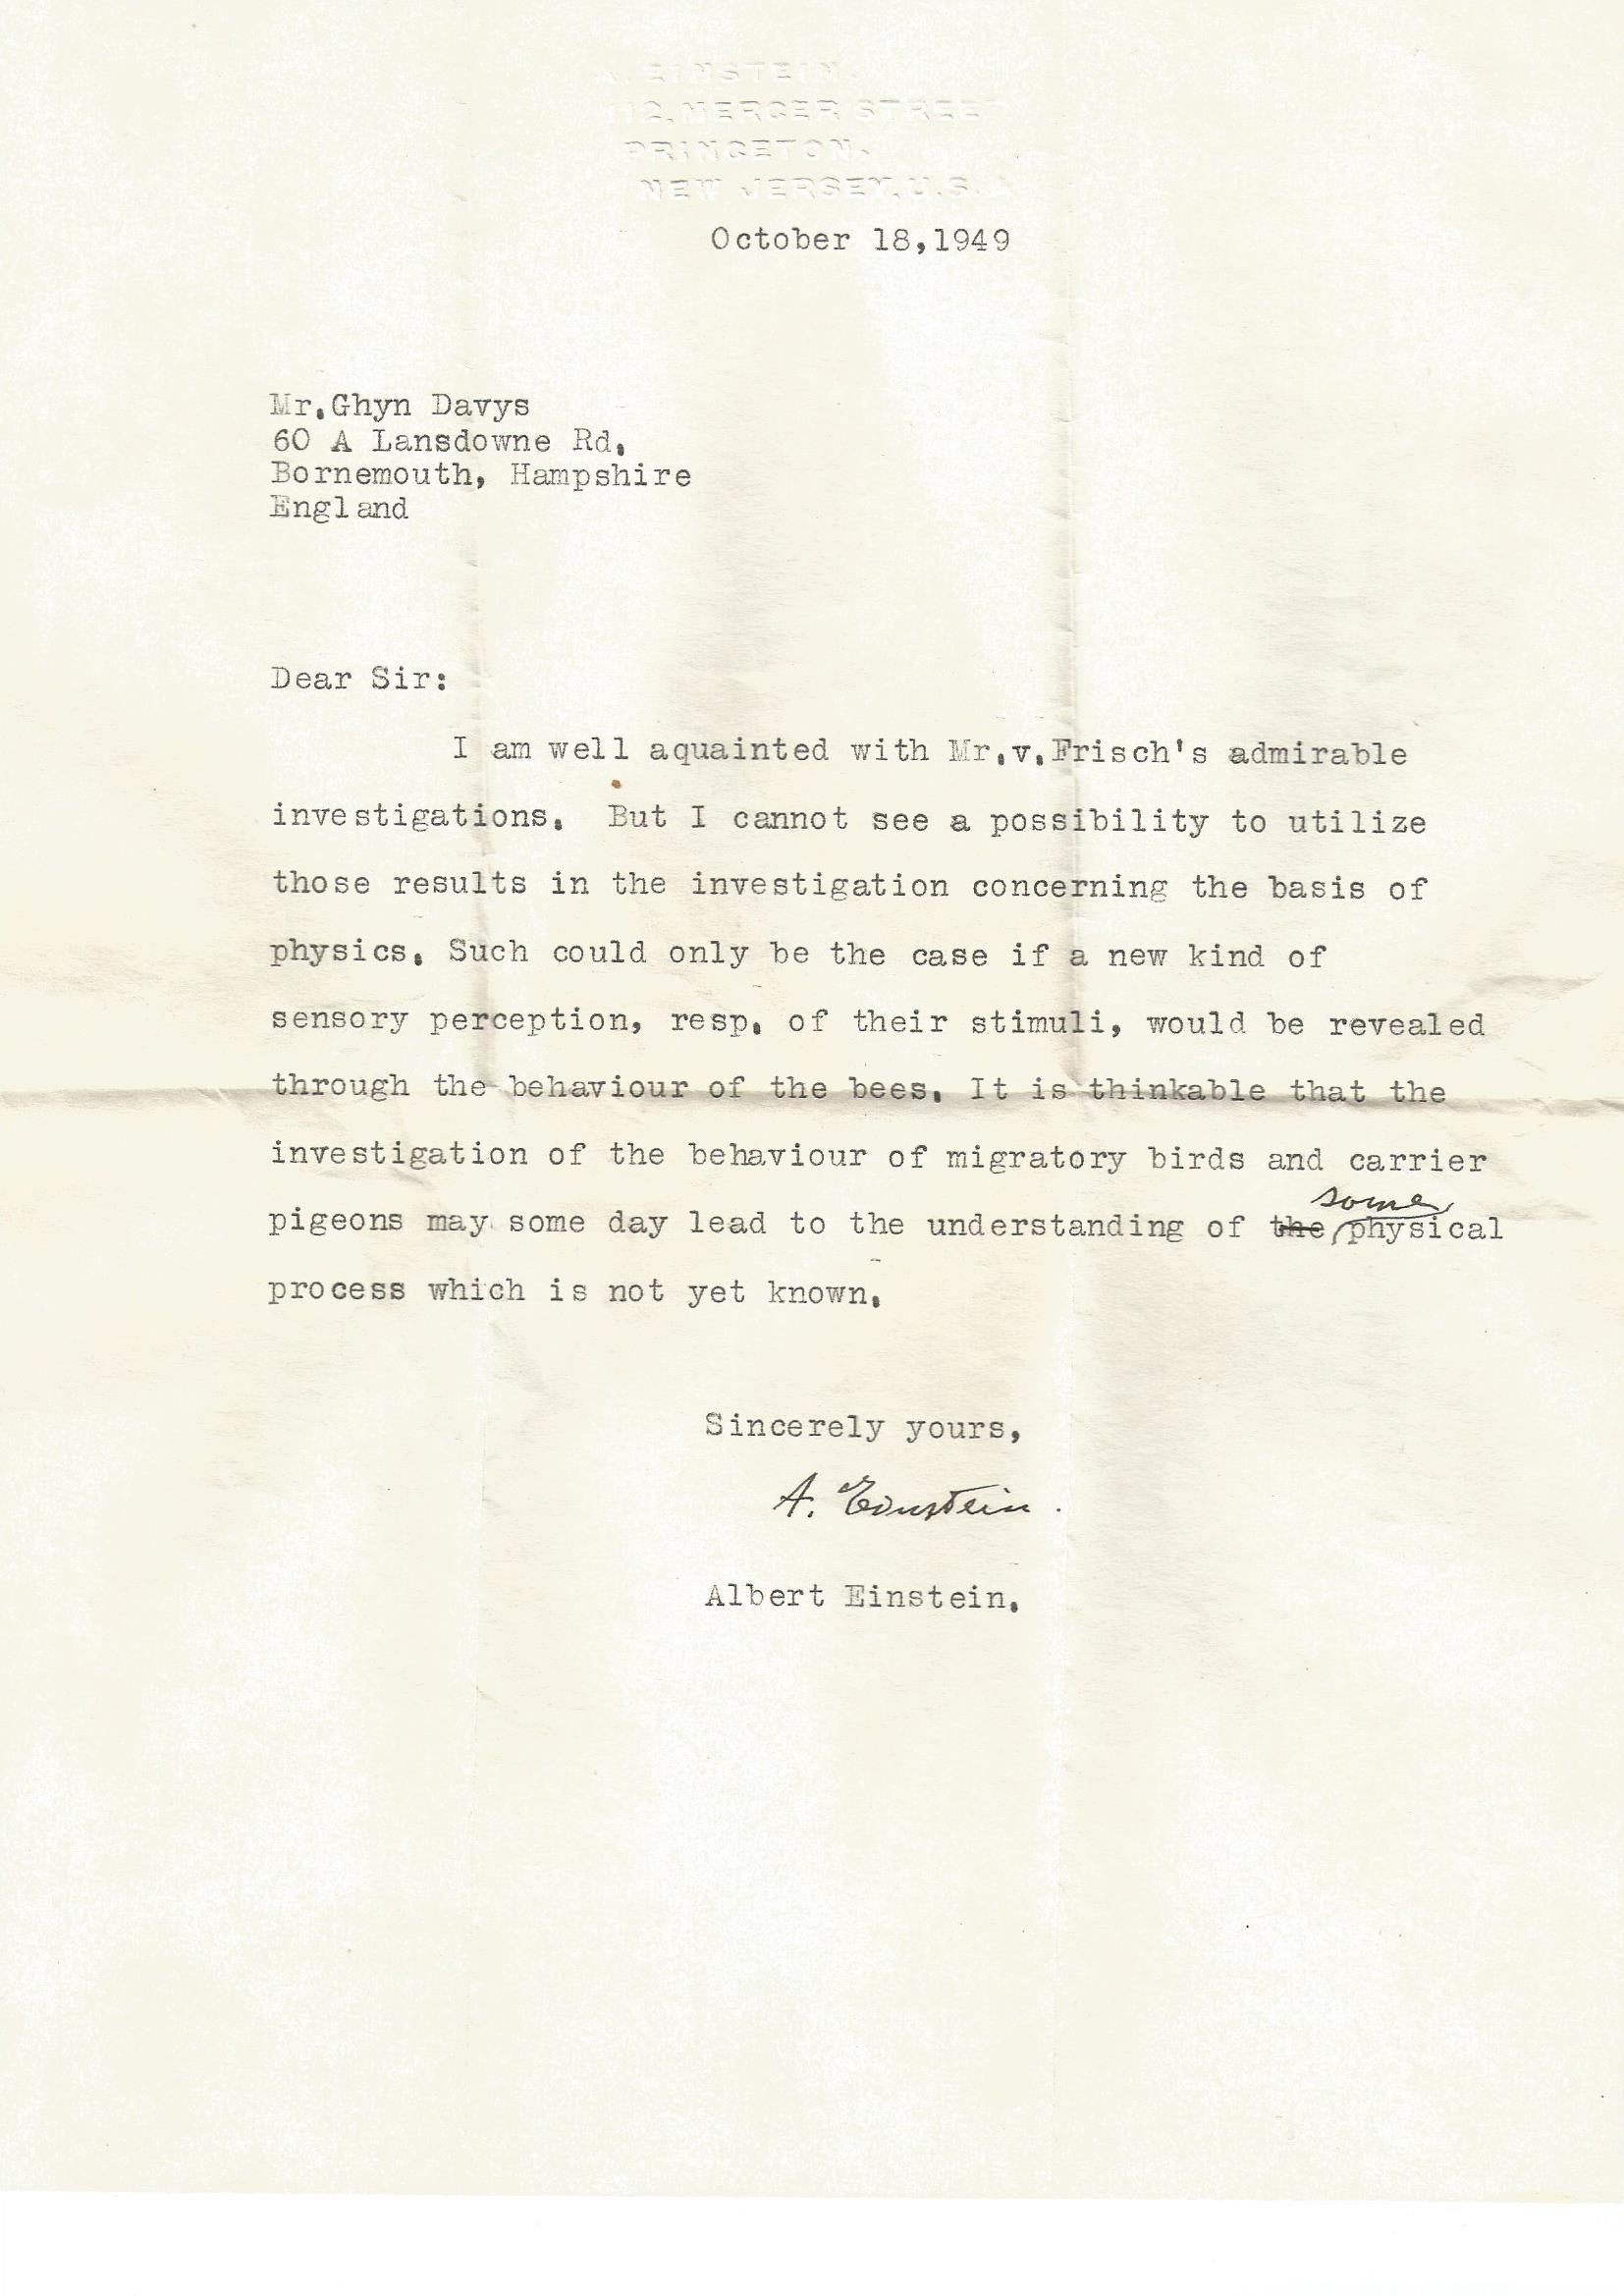 Letter by Albert Einstein, validated by The Hebrew University of Jerusalem, where Einstein bequeathed his notes, letters and records